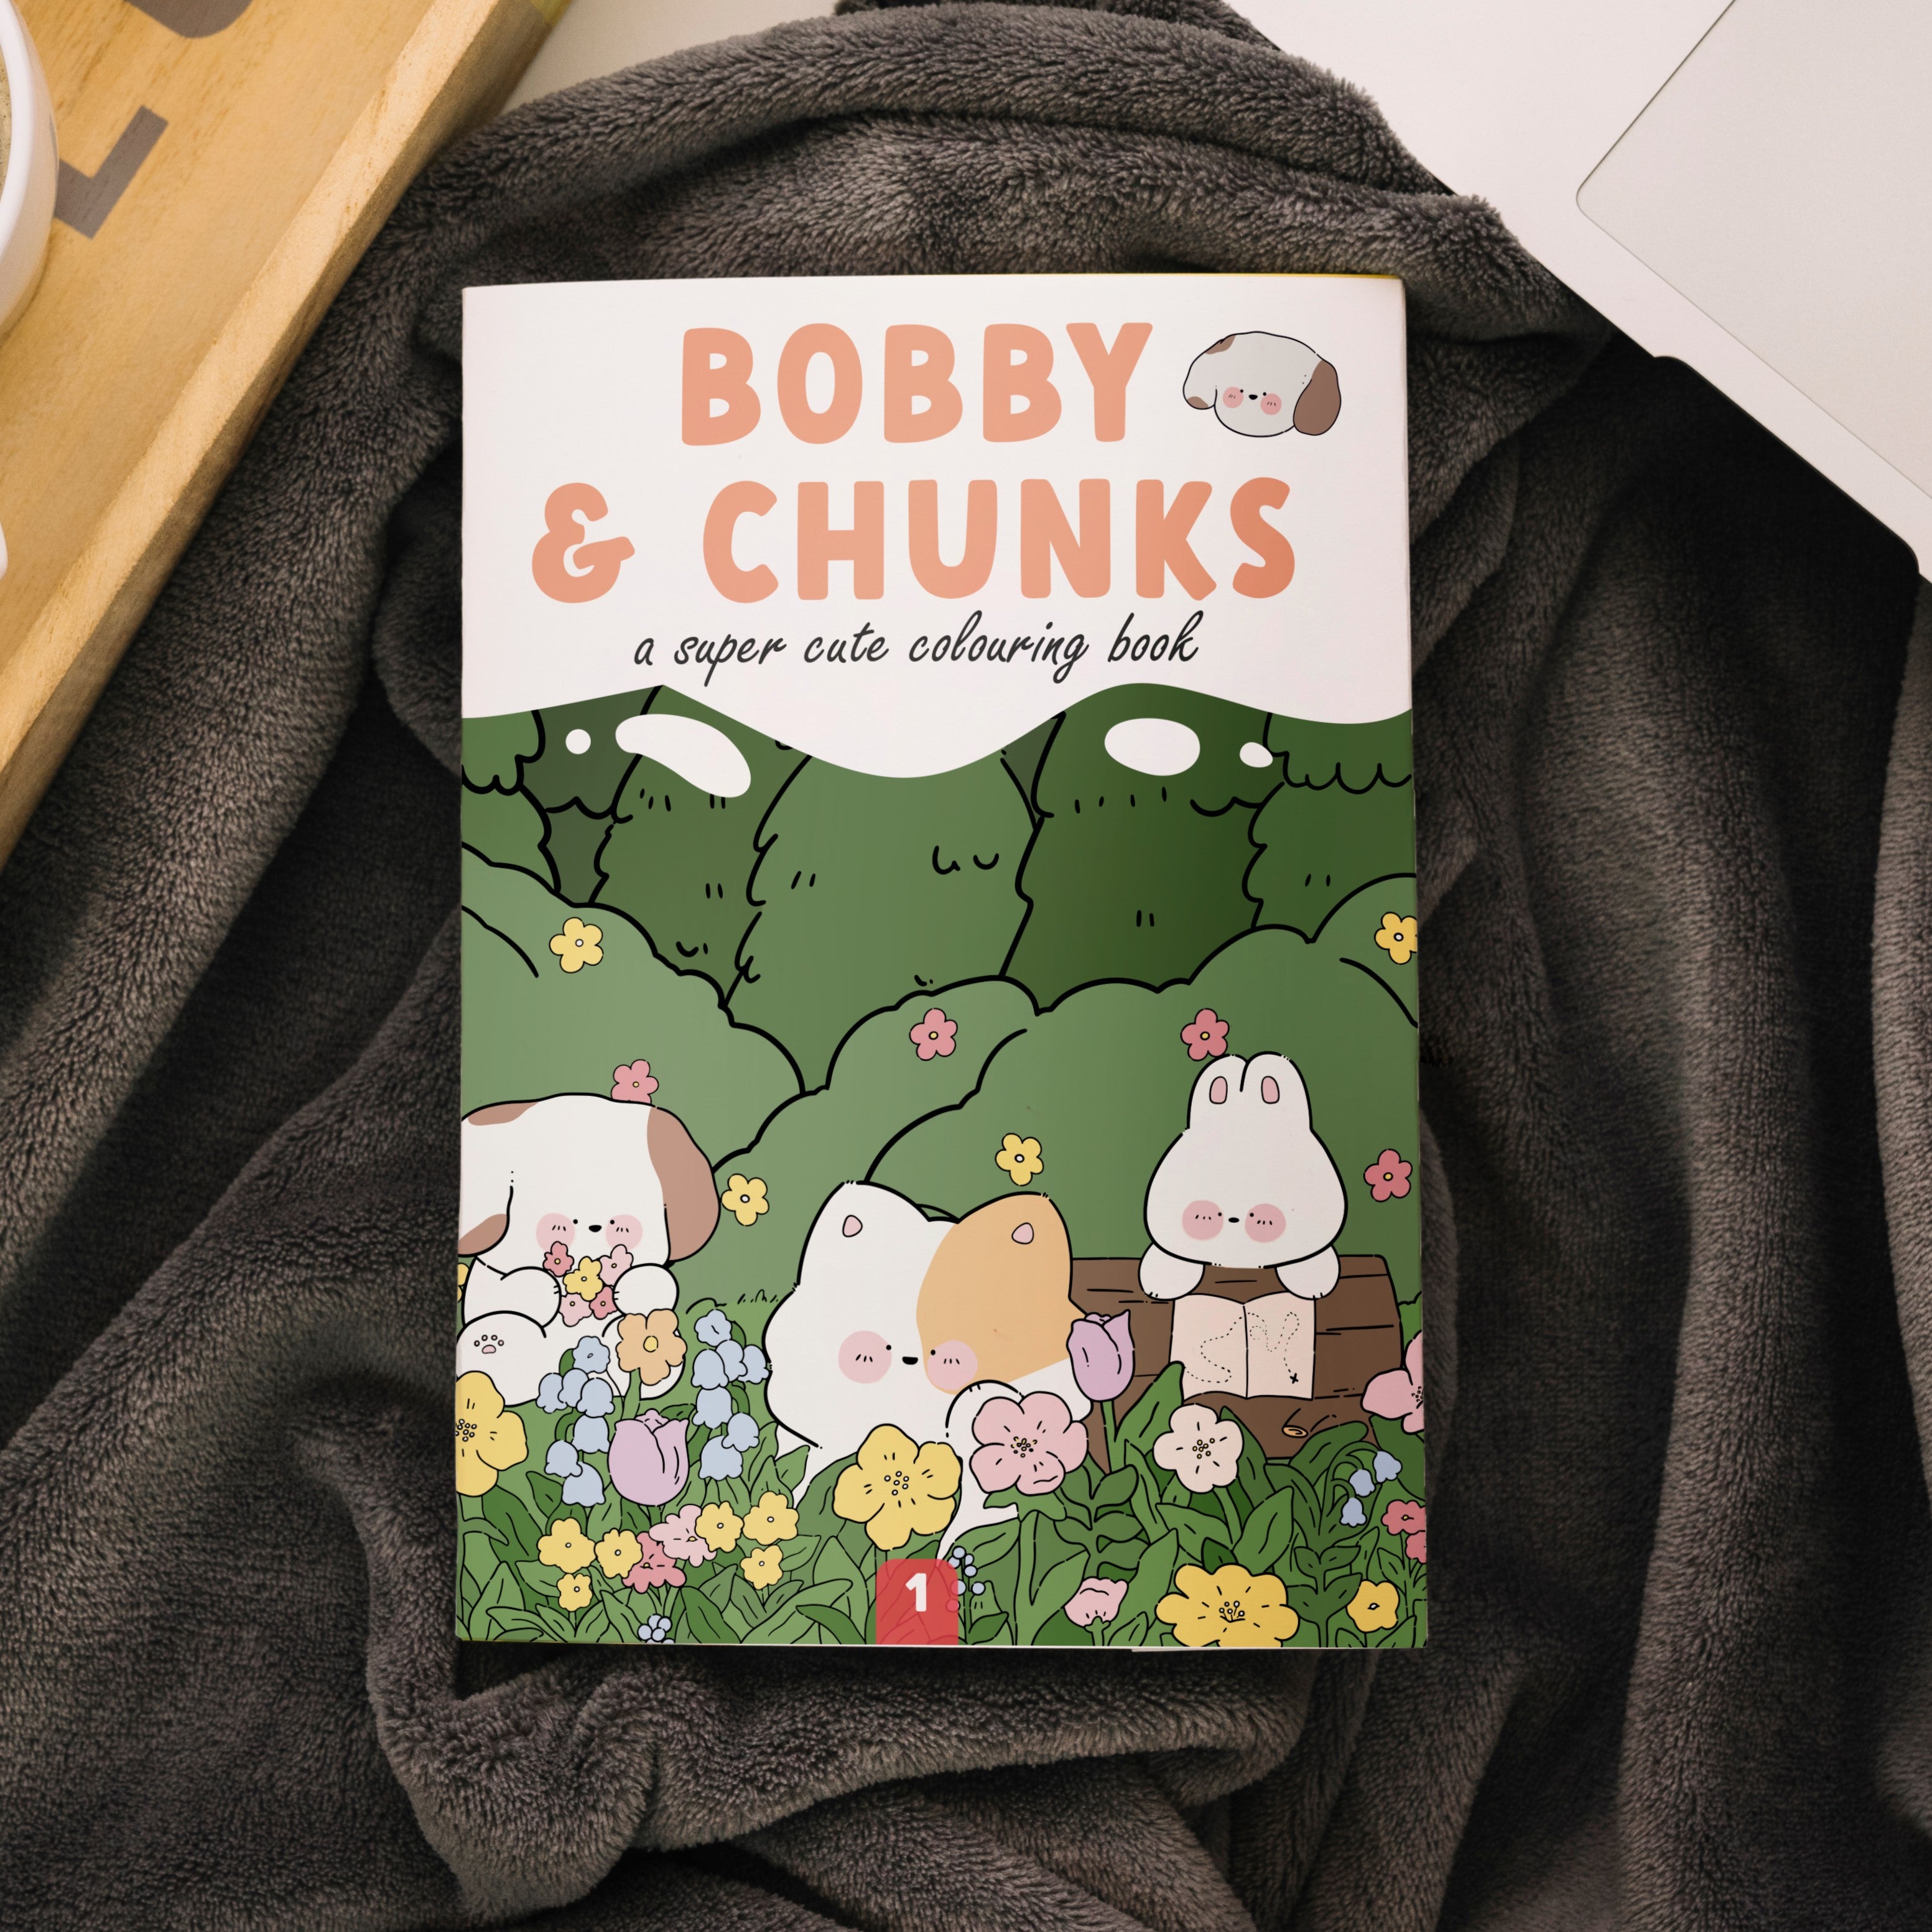 Bobby and chunks: Part 1